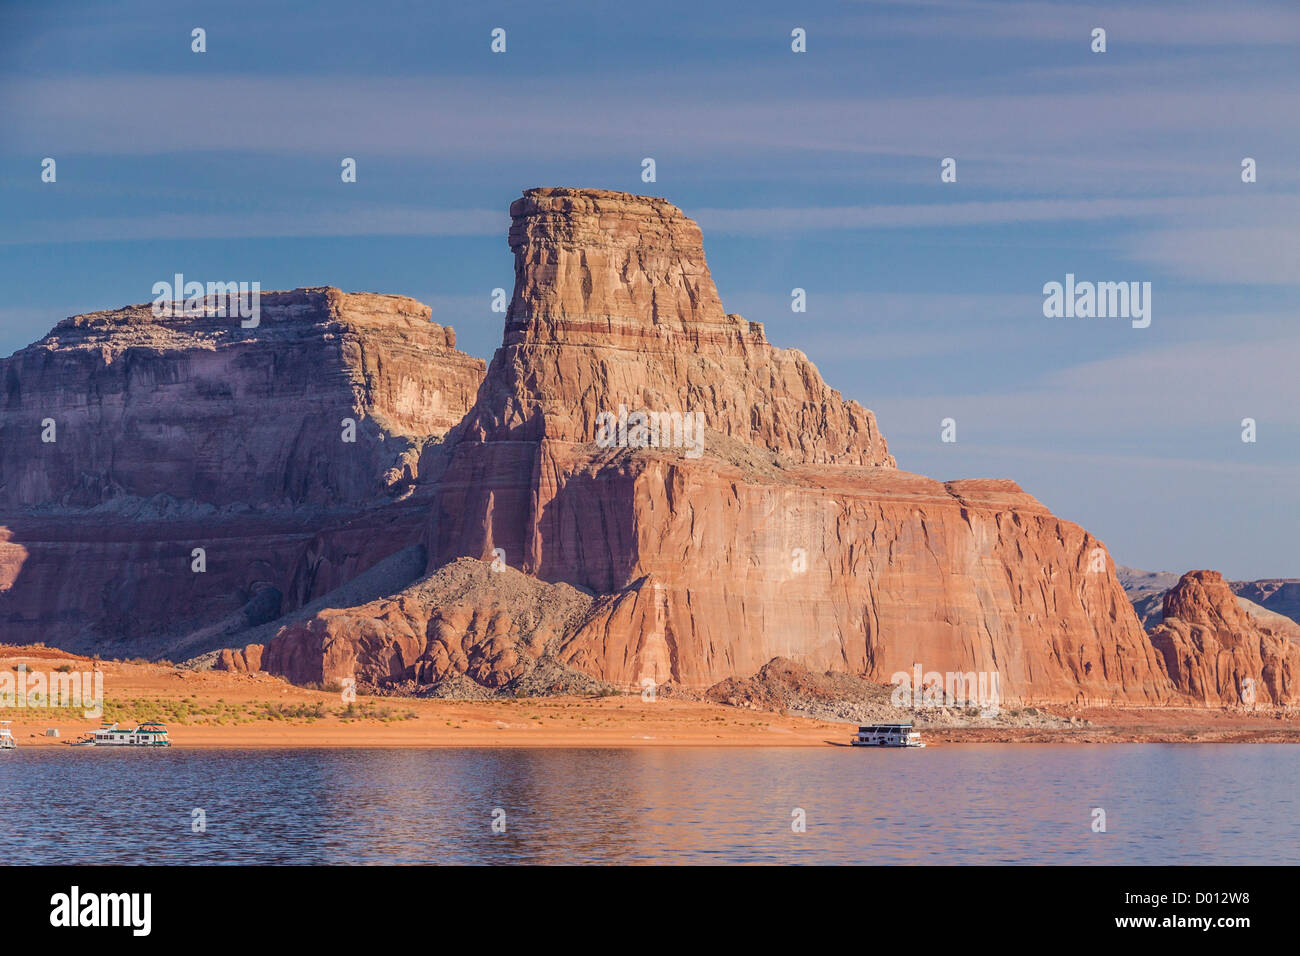 Lake Powell and the Glen Canyon National Recreation area, covering over a million acres with about 2000 miles of shoreline in Arizona and Utah. Stock Photo